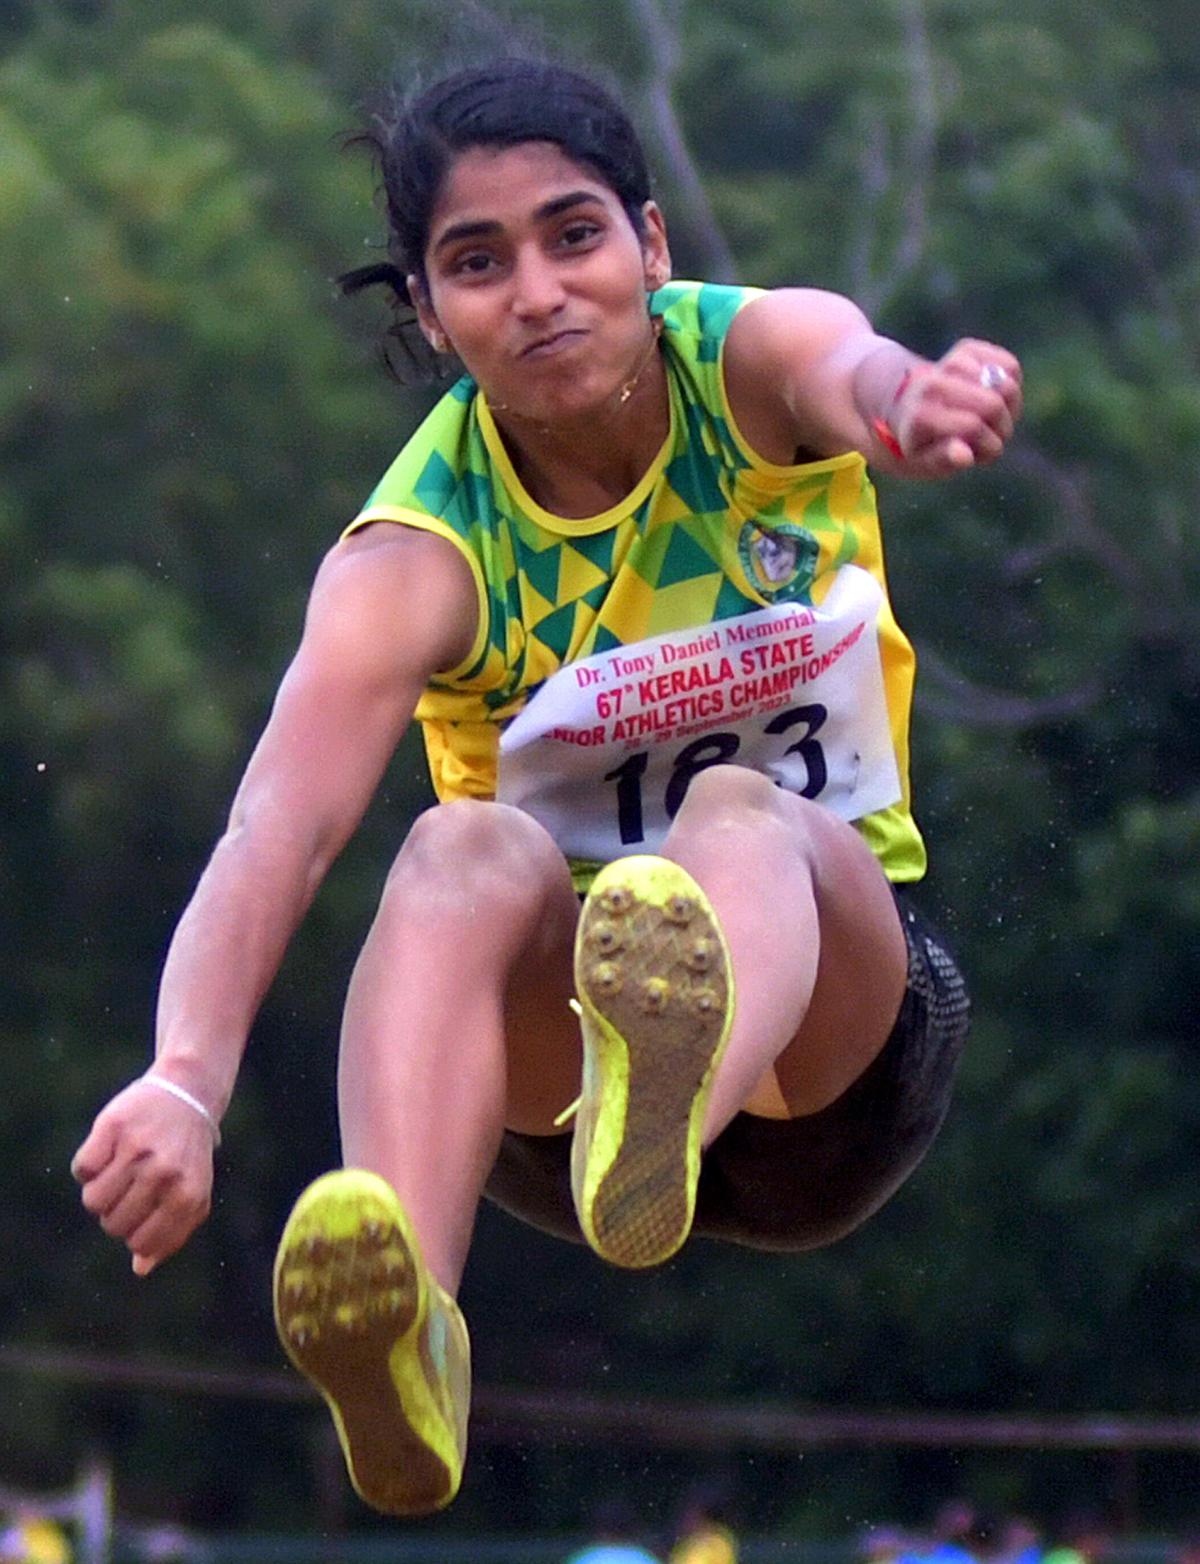 Ernakulam’s P.S. Prabhavathi who won the women’s long jump gold at the State senior athletics championships at Thenipalam.